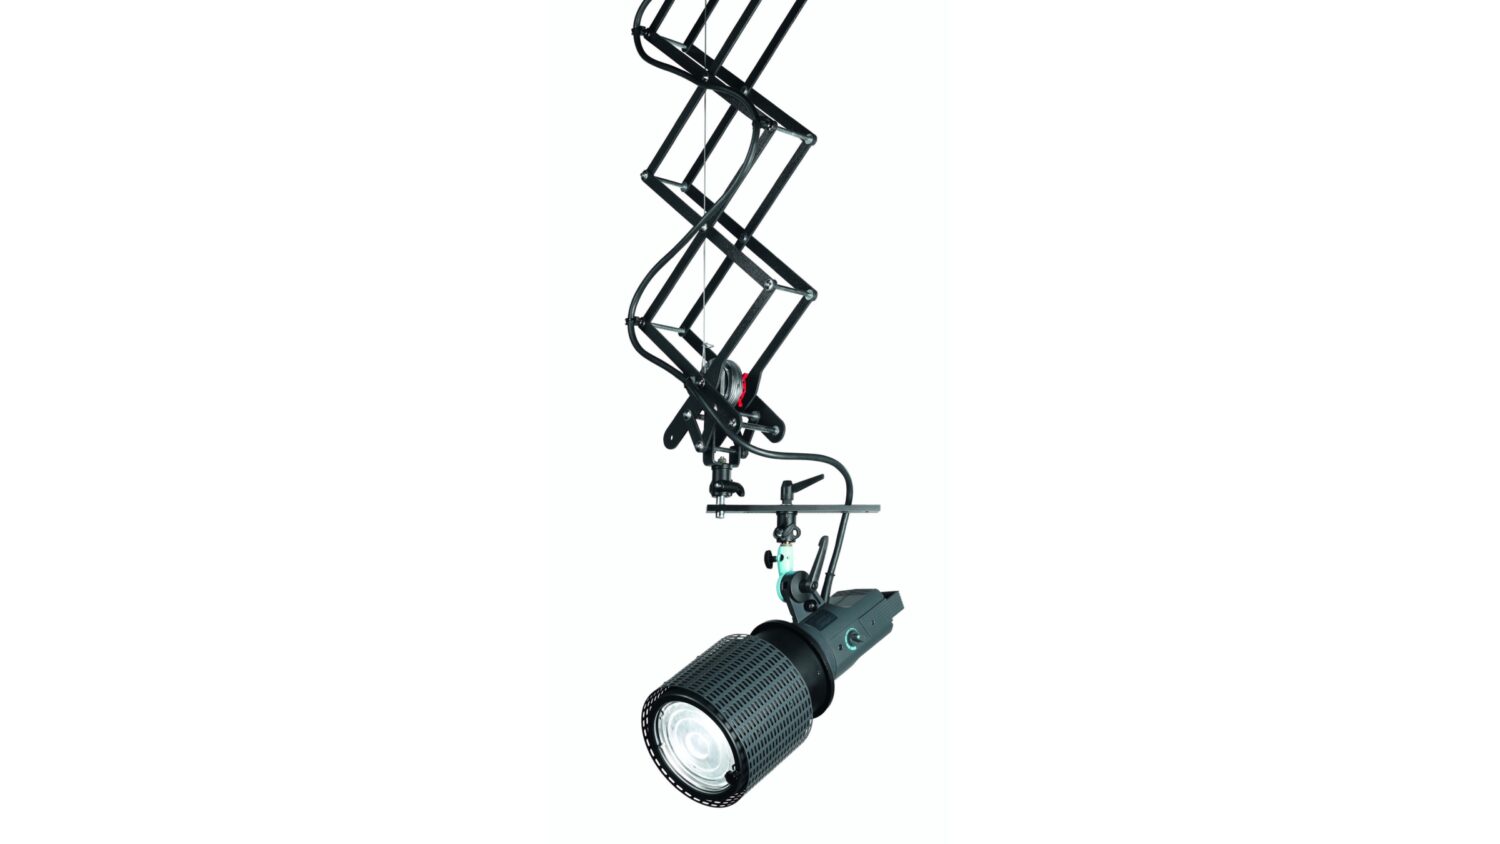 FOBA ceiling rail system pantograph with mounted lamp and a balance point counterweight